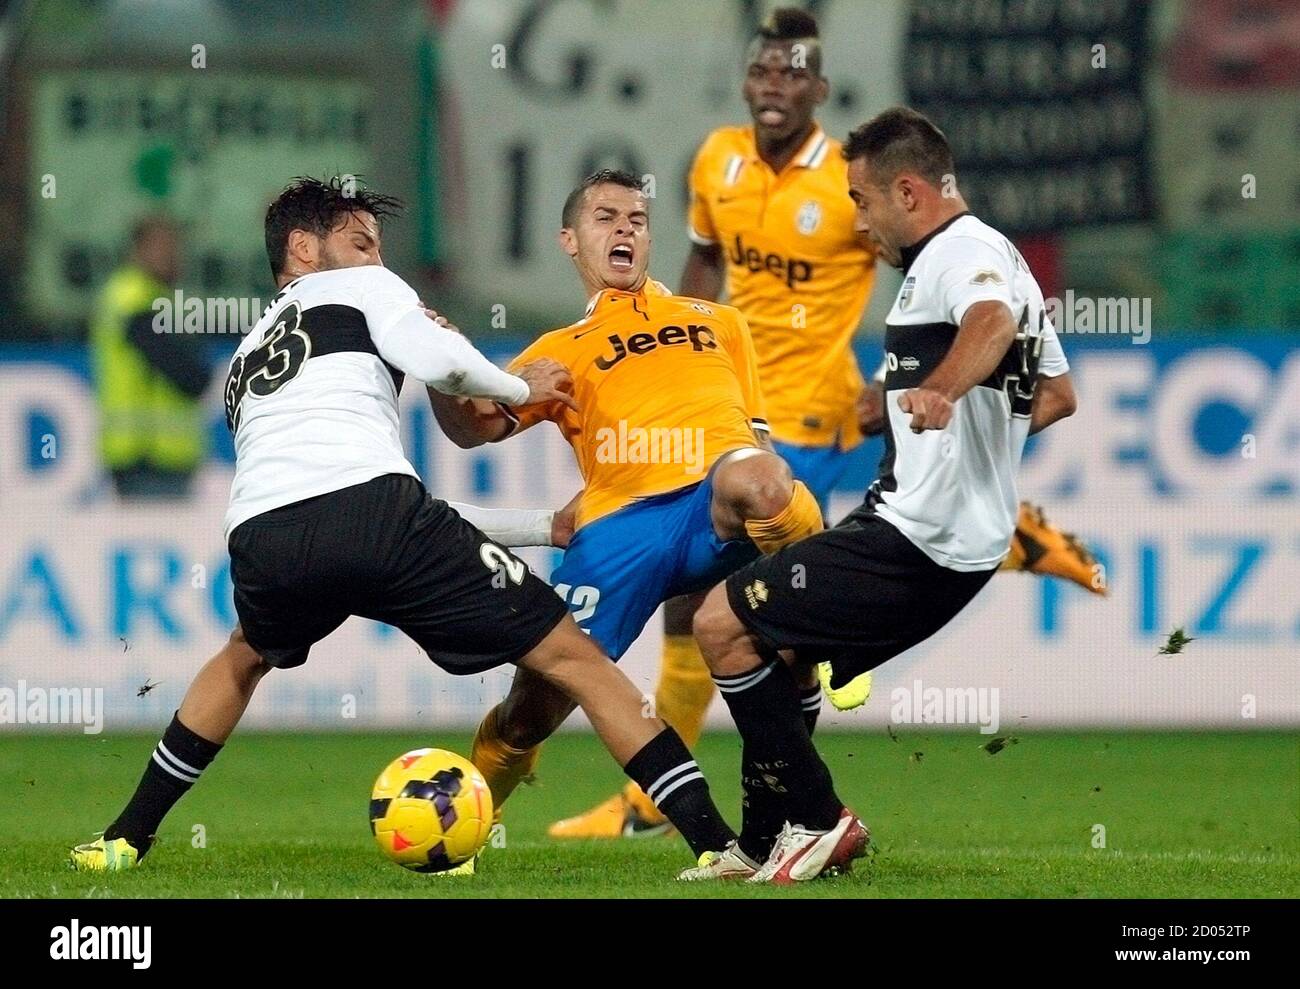 Juventus' Sebastian Giovinco (2nd L) fights for the ball with Parma's Pedro Mendes (L) and Marco Marchionni during their Italian Serie A soccer match at Tardini stadium in Parma November 2, 2013. REUTERS/Alessandro Garofalo (ITALY - Tags: SPORT SOCCER) Stock Photo